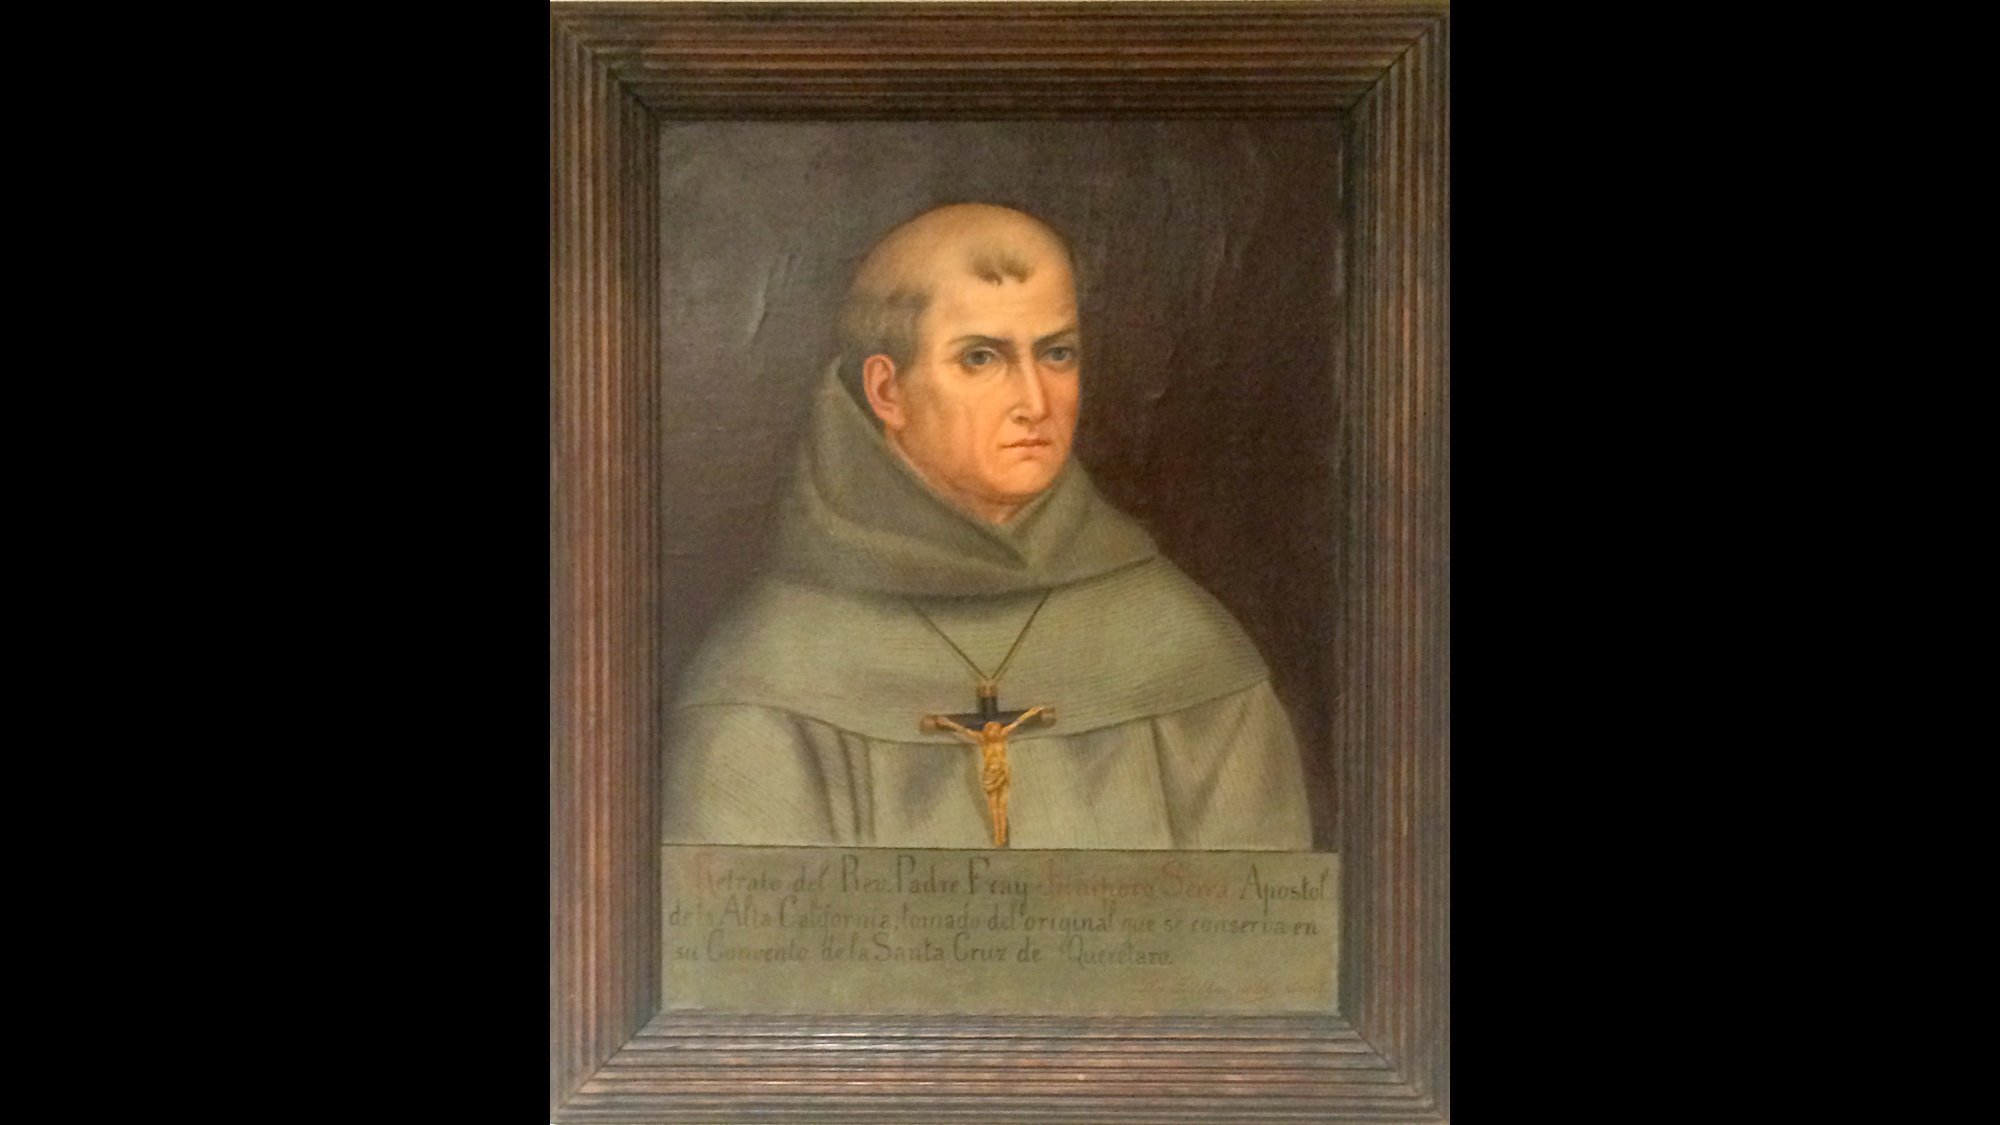 Few images exist of 18th-century Spanish missionary Junipero Serra, a founding figure of the American West. This portrait has become one of the standard representations of him and was done in the early 1900s by a Mexican priest, Father Jose Mosqueda, who said he copied it from a work that could have been an original portrait of Serra from the 1750s.

Credit: From Santa Barbara Mission Archive-Library